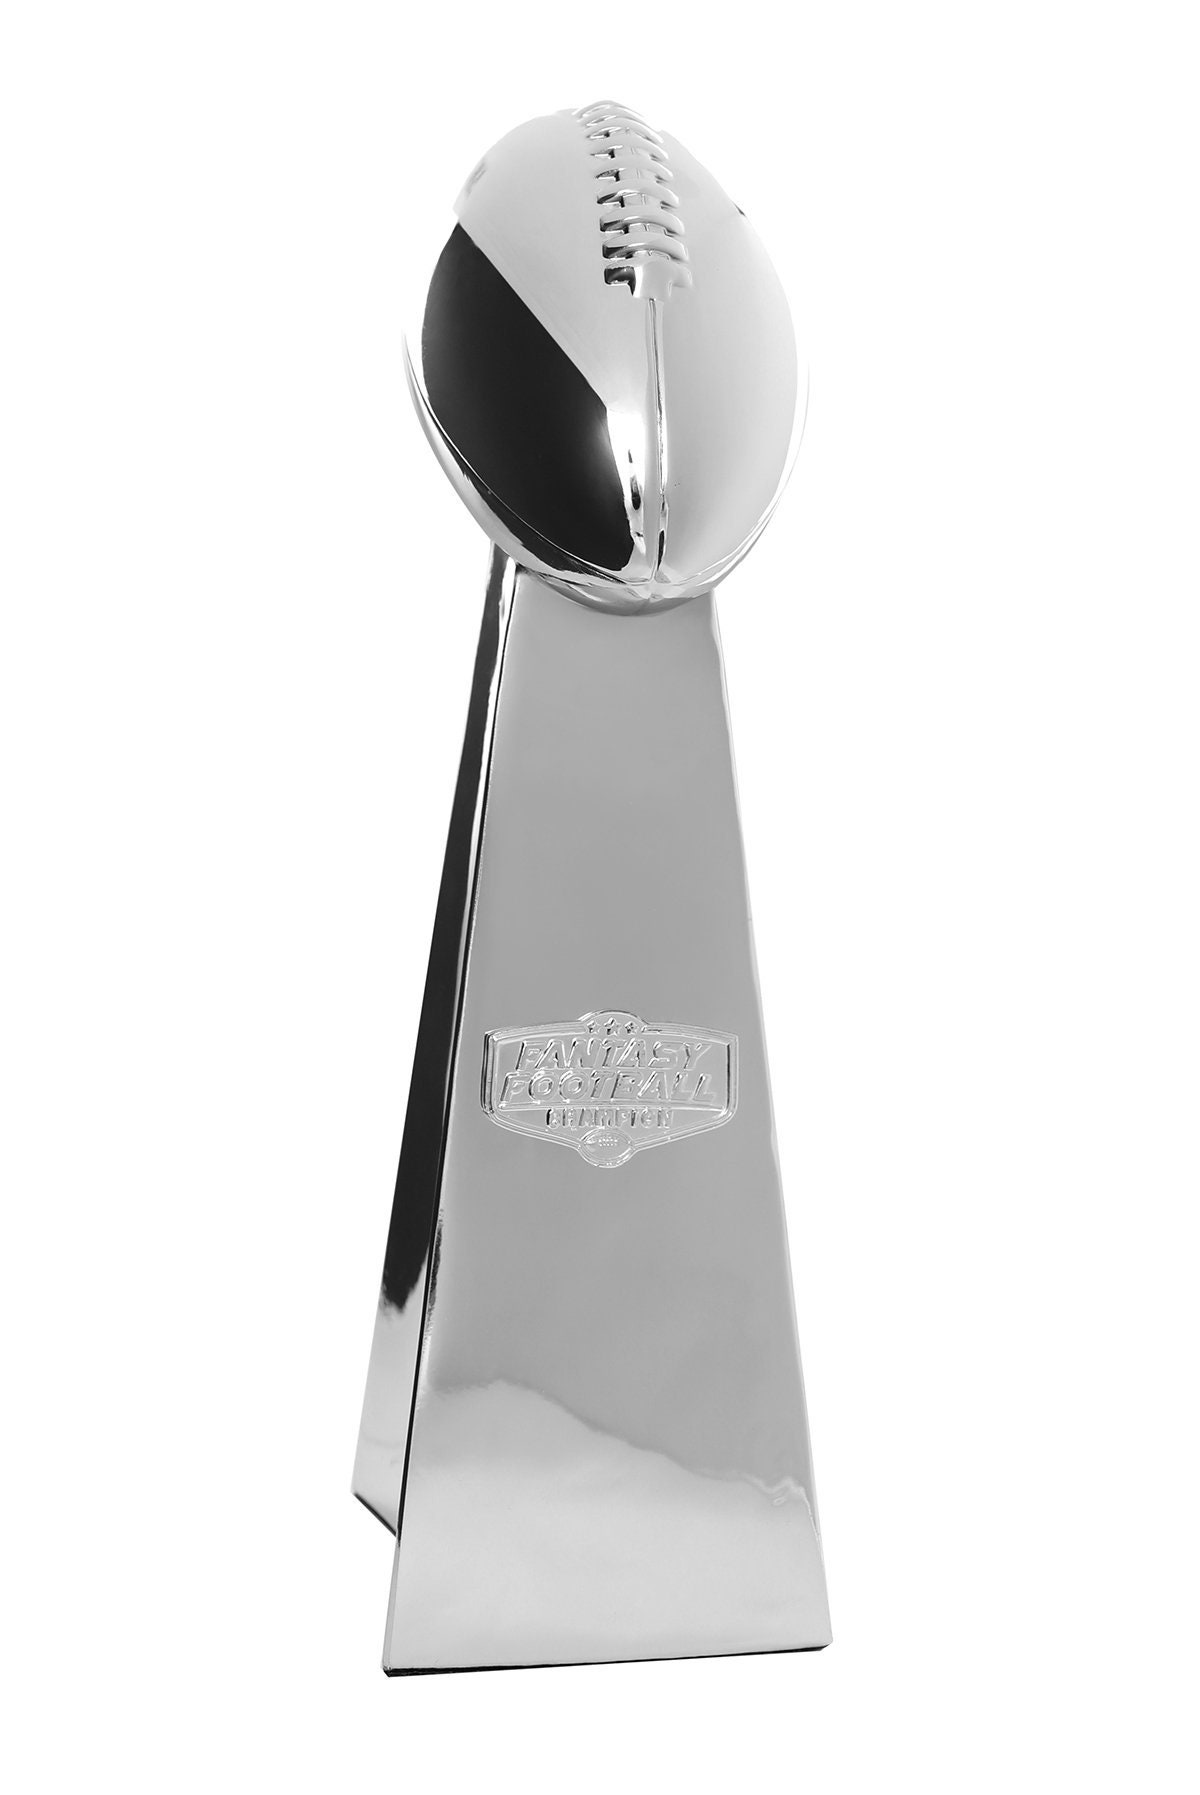 Ultimate Fantasy Football Trophy Realistic Fantasy League Winner’s Cup Bright Silver Lombardi Trophy Elegant and Durable Design Sportzday Fantasy Football Trophy-14 INCHES Large 